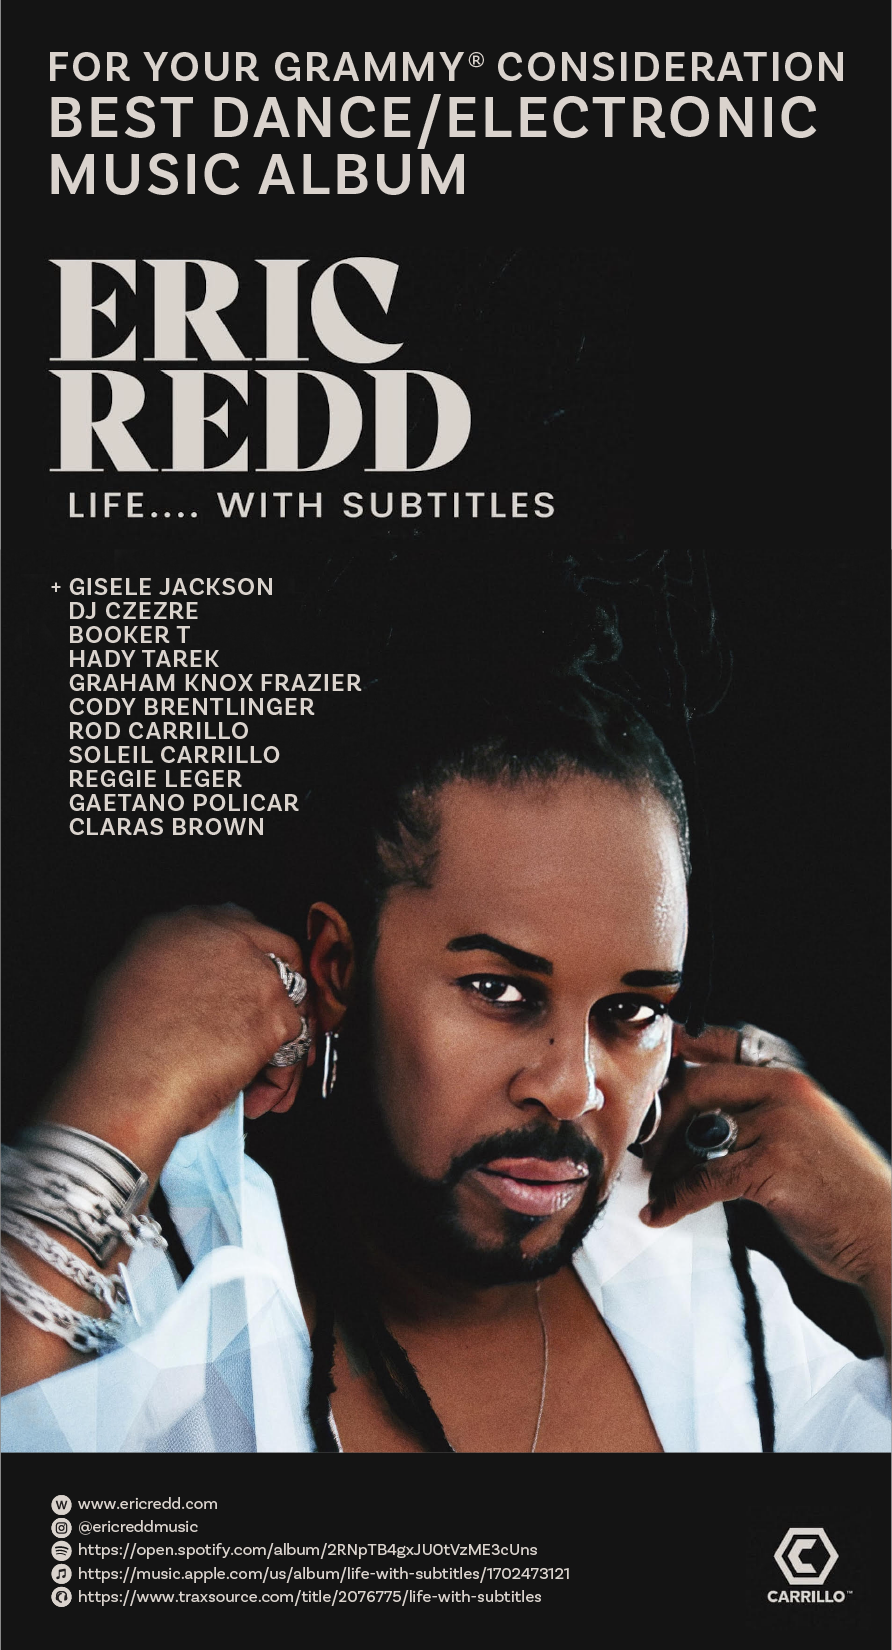 'Life... With Subtitles': Eric Redd's Electronic music Gem Submitted for Grammy Consideration